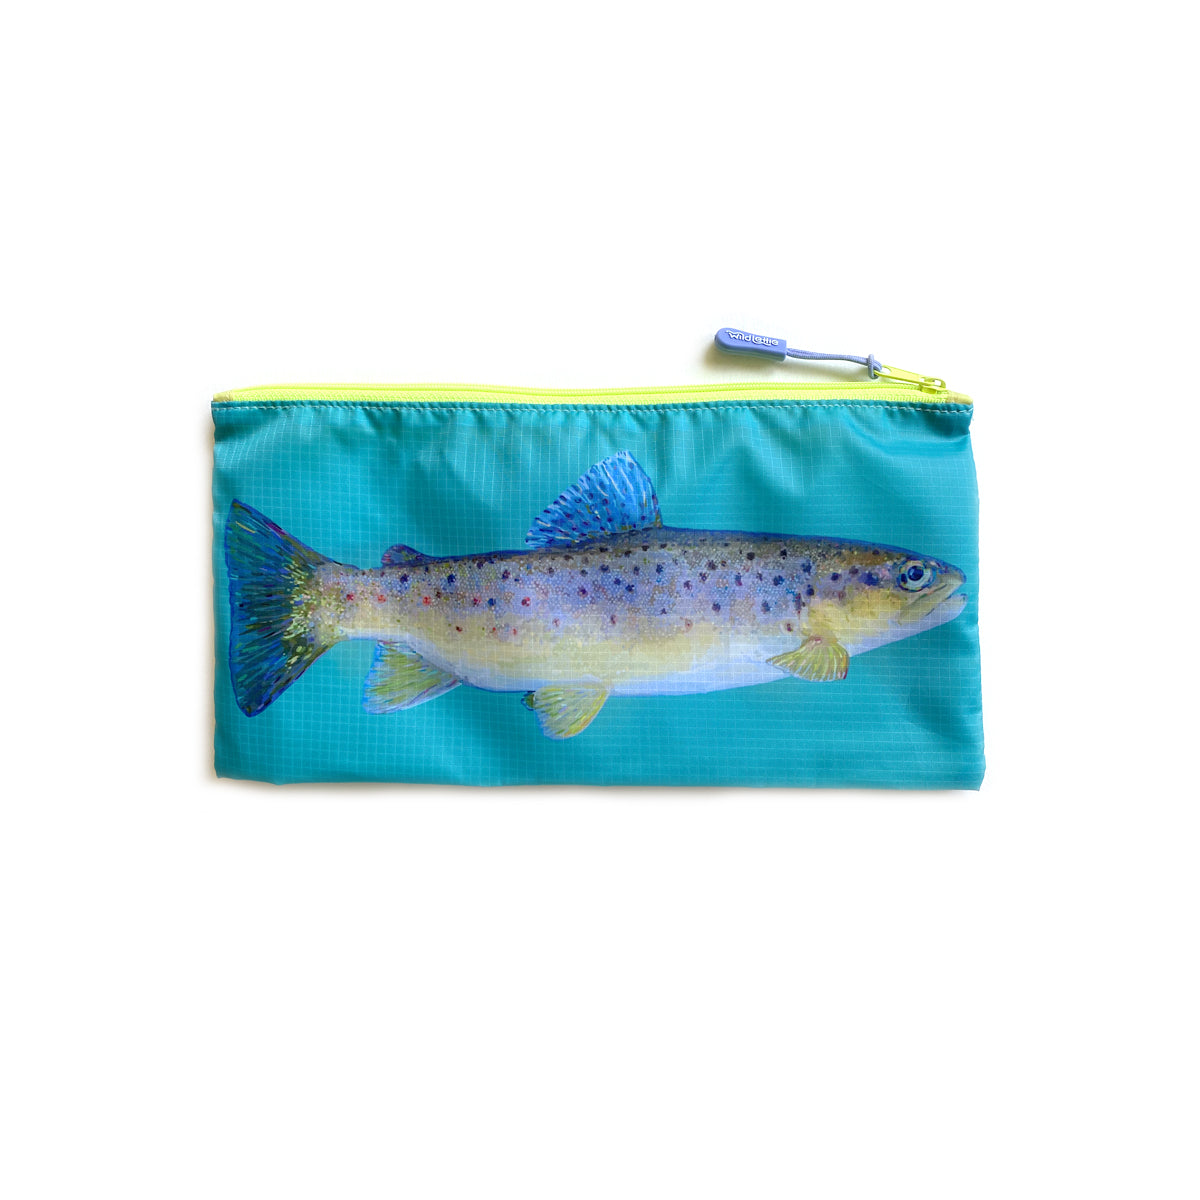 Load image into Gallery viewer, Brown Trout Large Zip Bag
